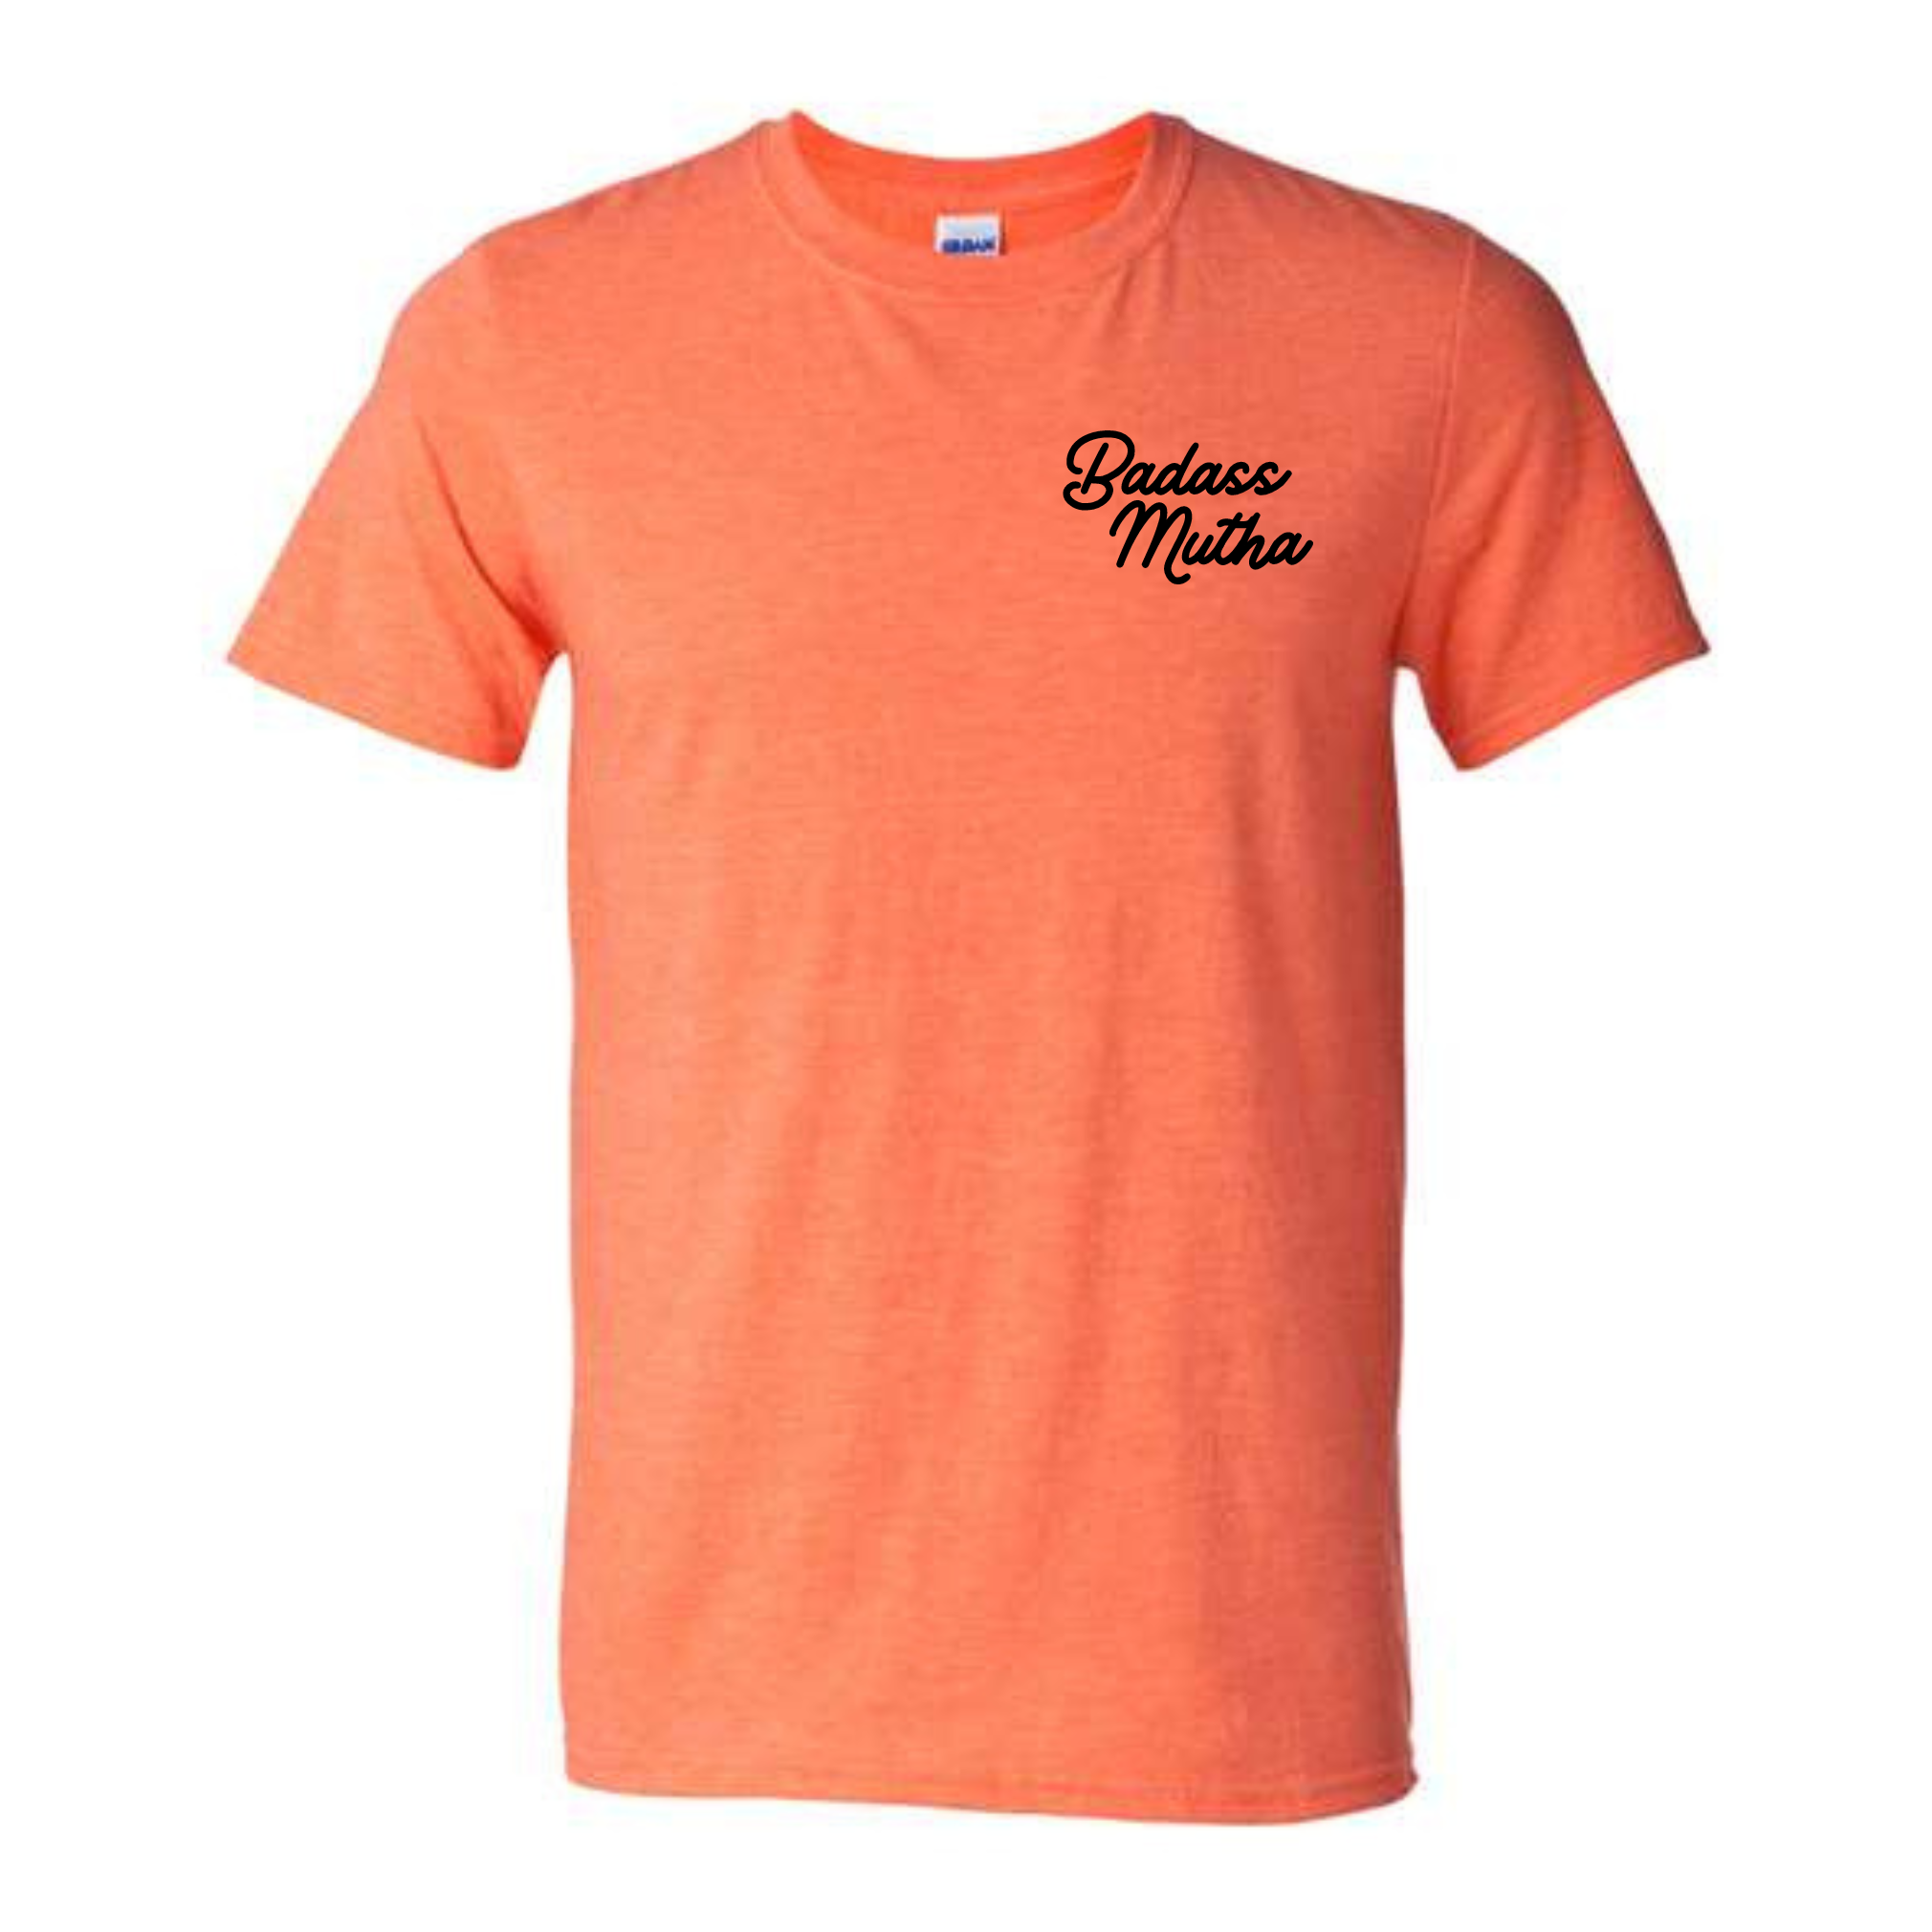 Badass Mutha Coral Tee-last one! Large